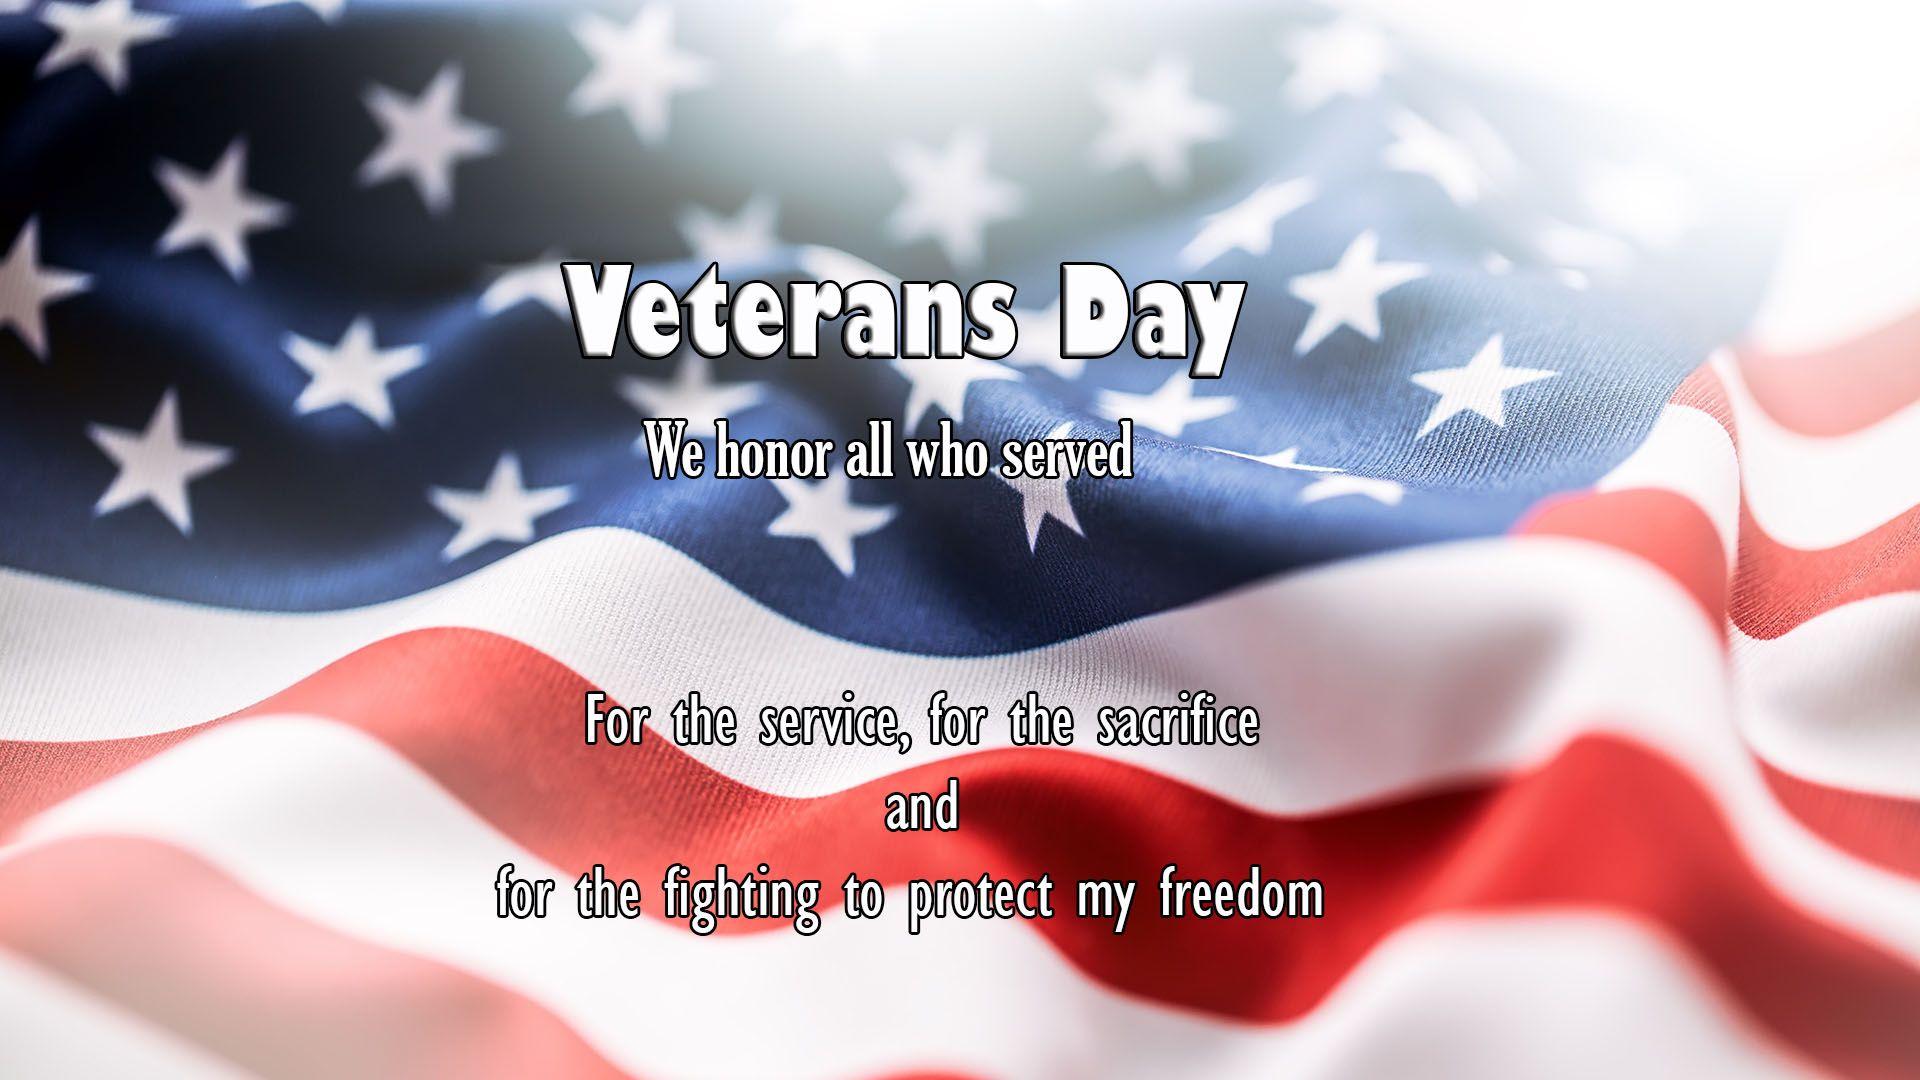 Happy Veterans Day 2017 HD Wallpaper, Cards & Picture